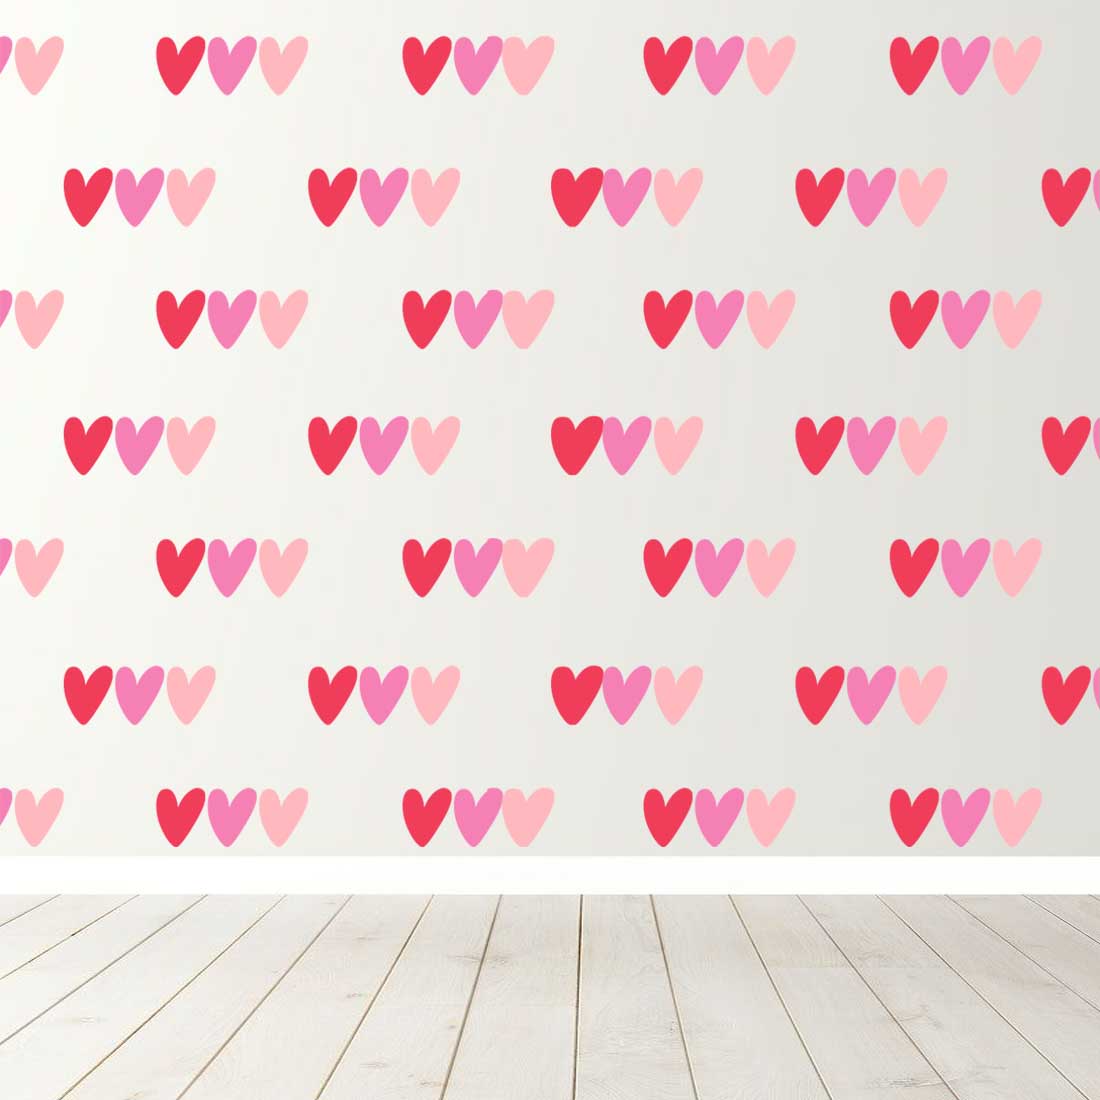 love pattern preview image.